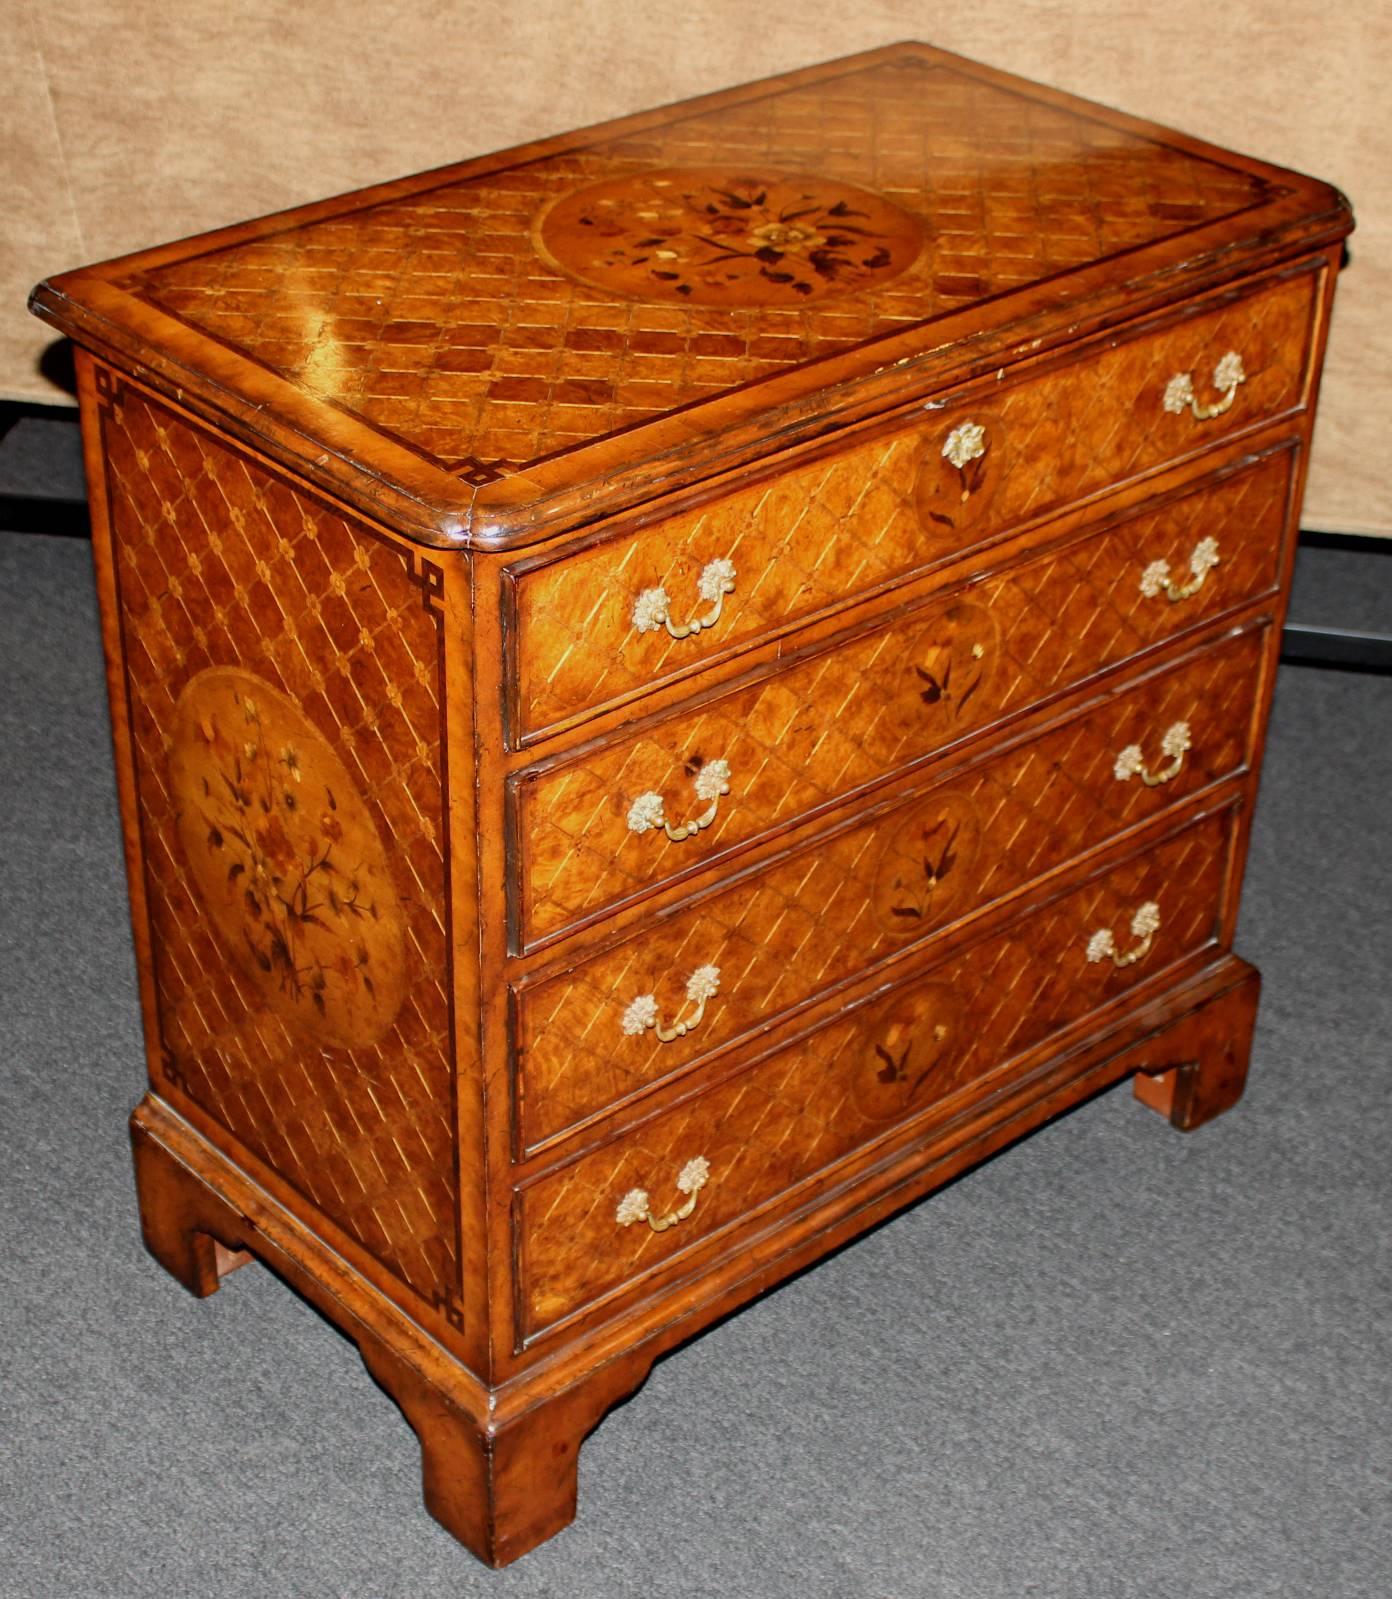 An exceptional diminutive English four-drawer chest with extensive floral and diamond inlay, rectangular molded top with pinched corners, sides and drawer fronts all with banding, centered by pateraes. The chest is constructed in mahogany, with